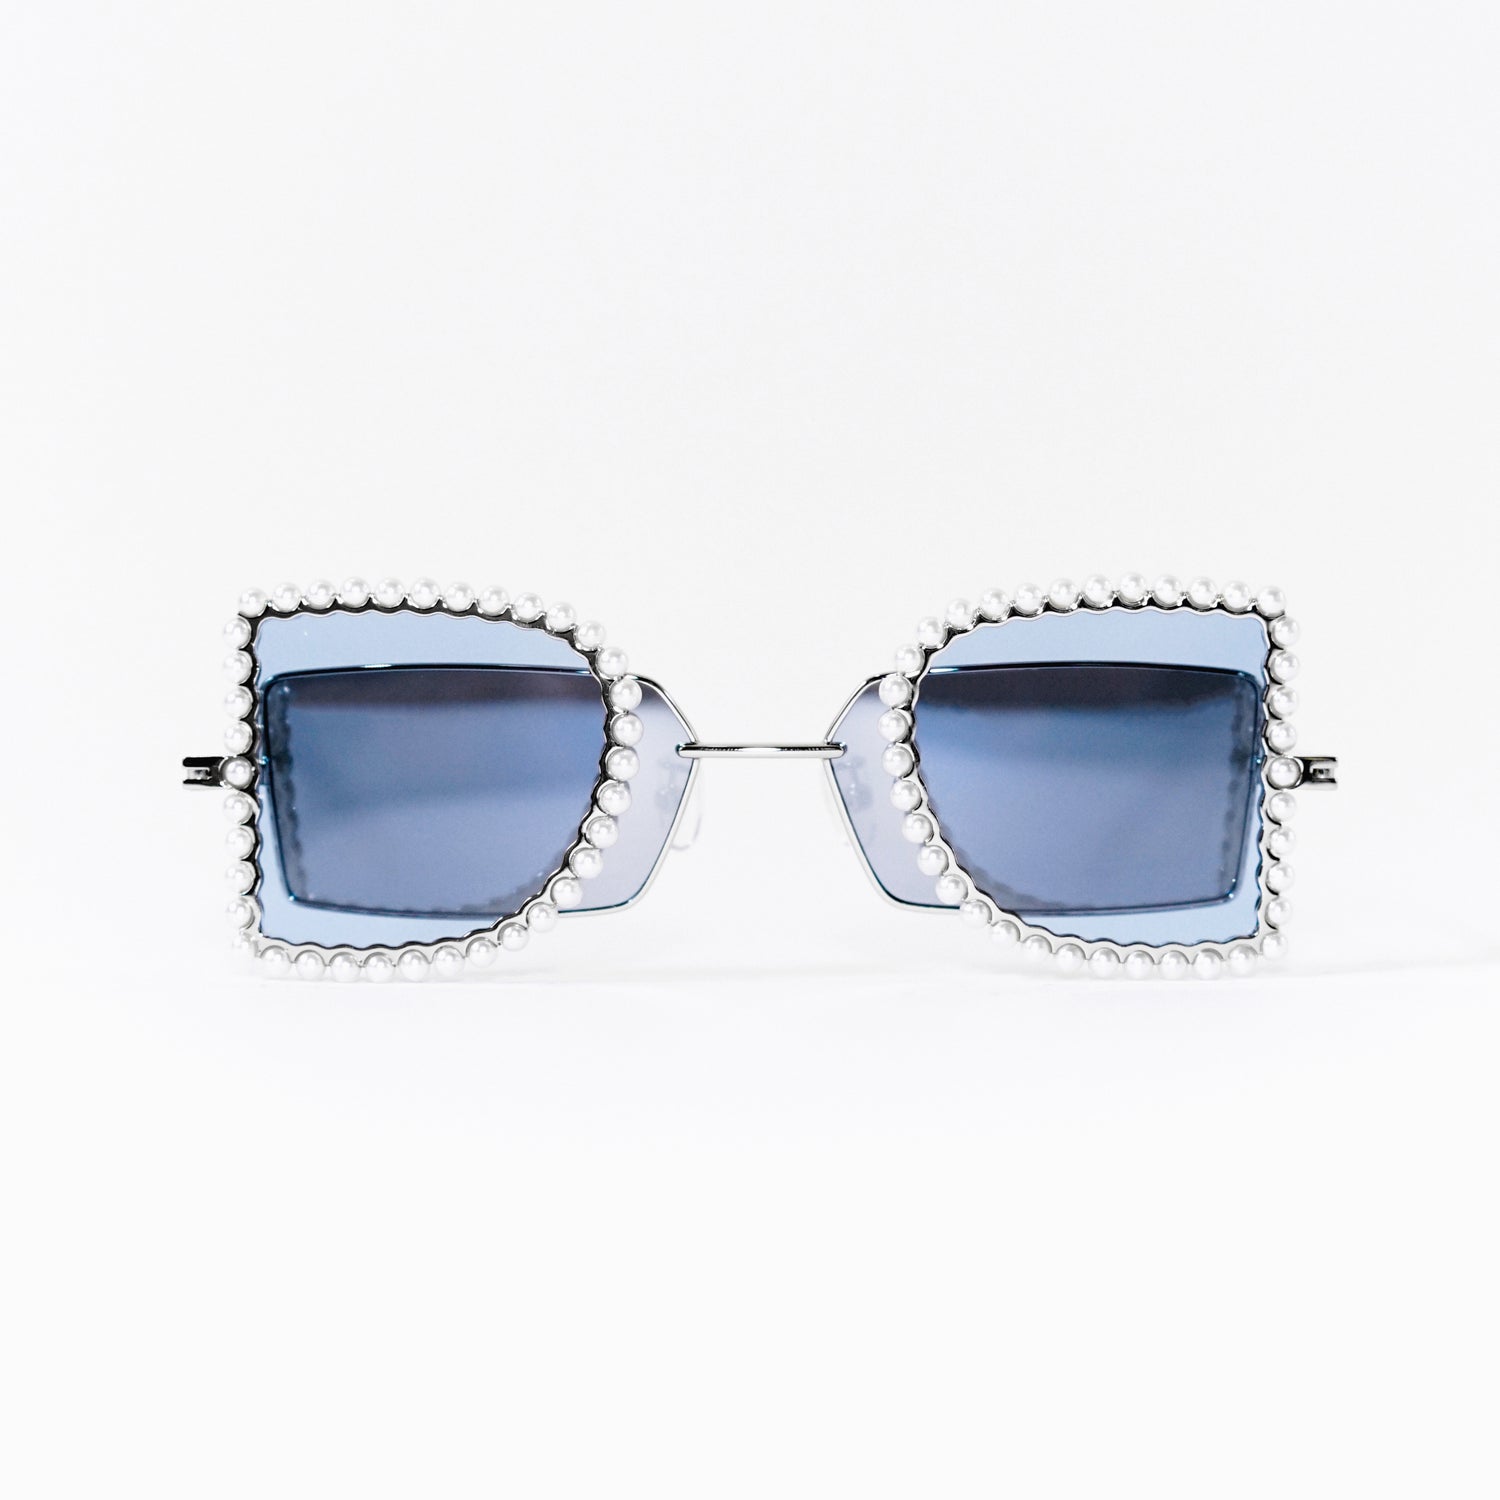 sunglasses with pearl rimmed window closed and blue polaroid lens front